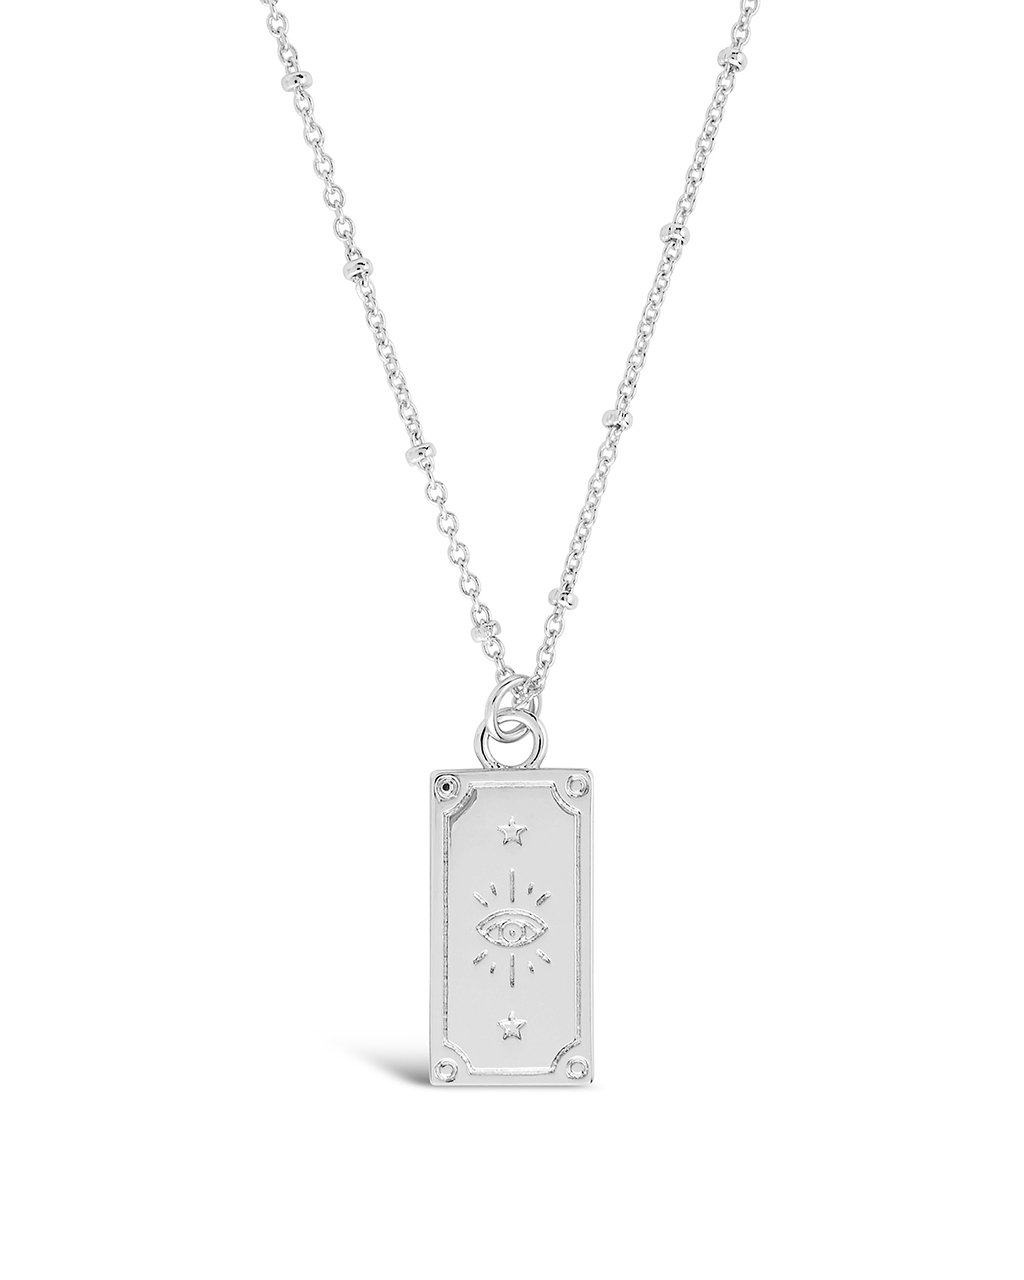 The Sun Tarot Card Necklace - Sterling Forever